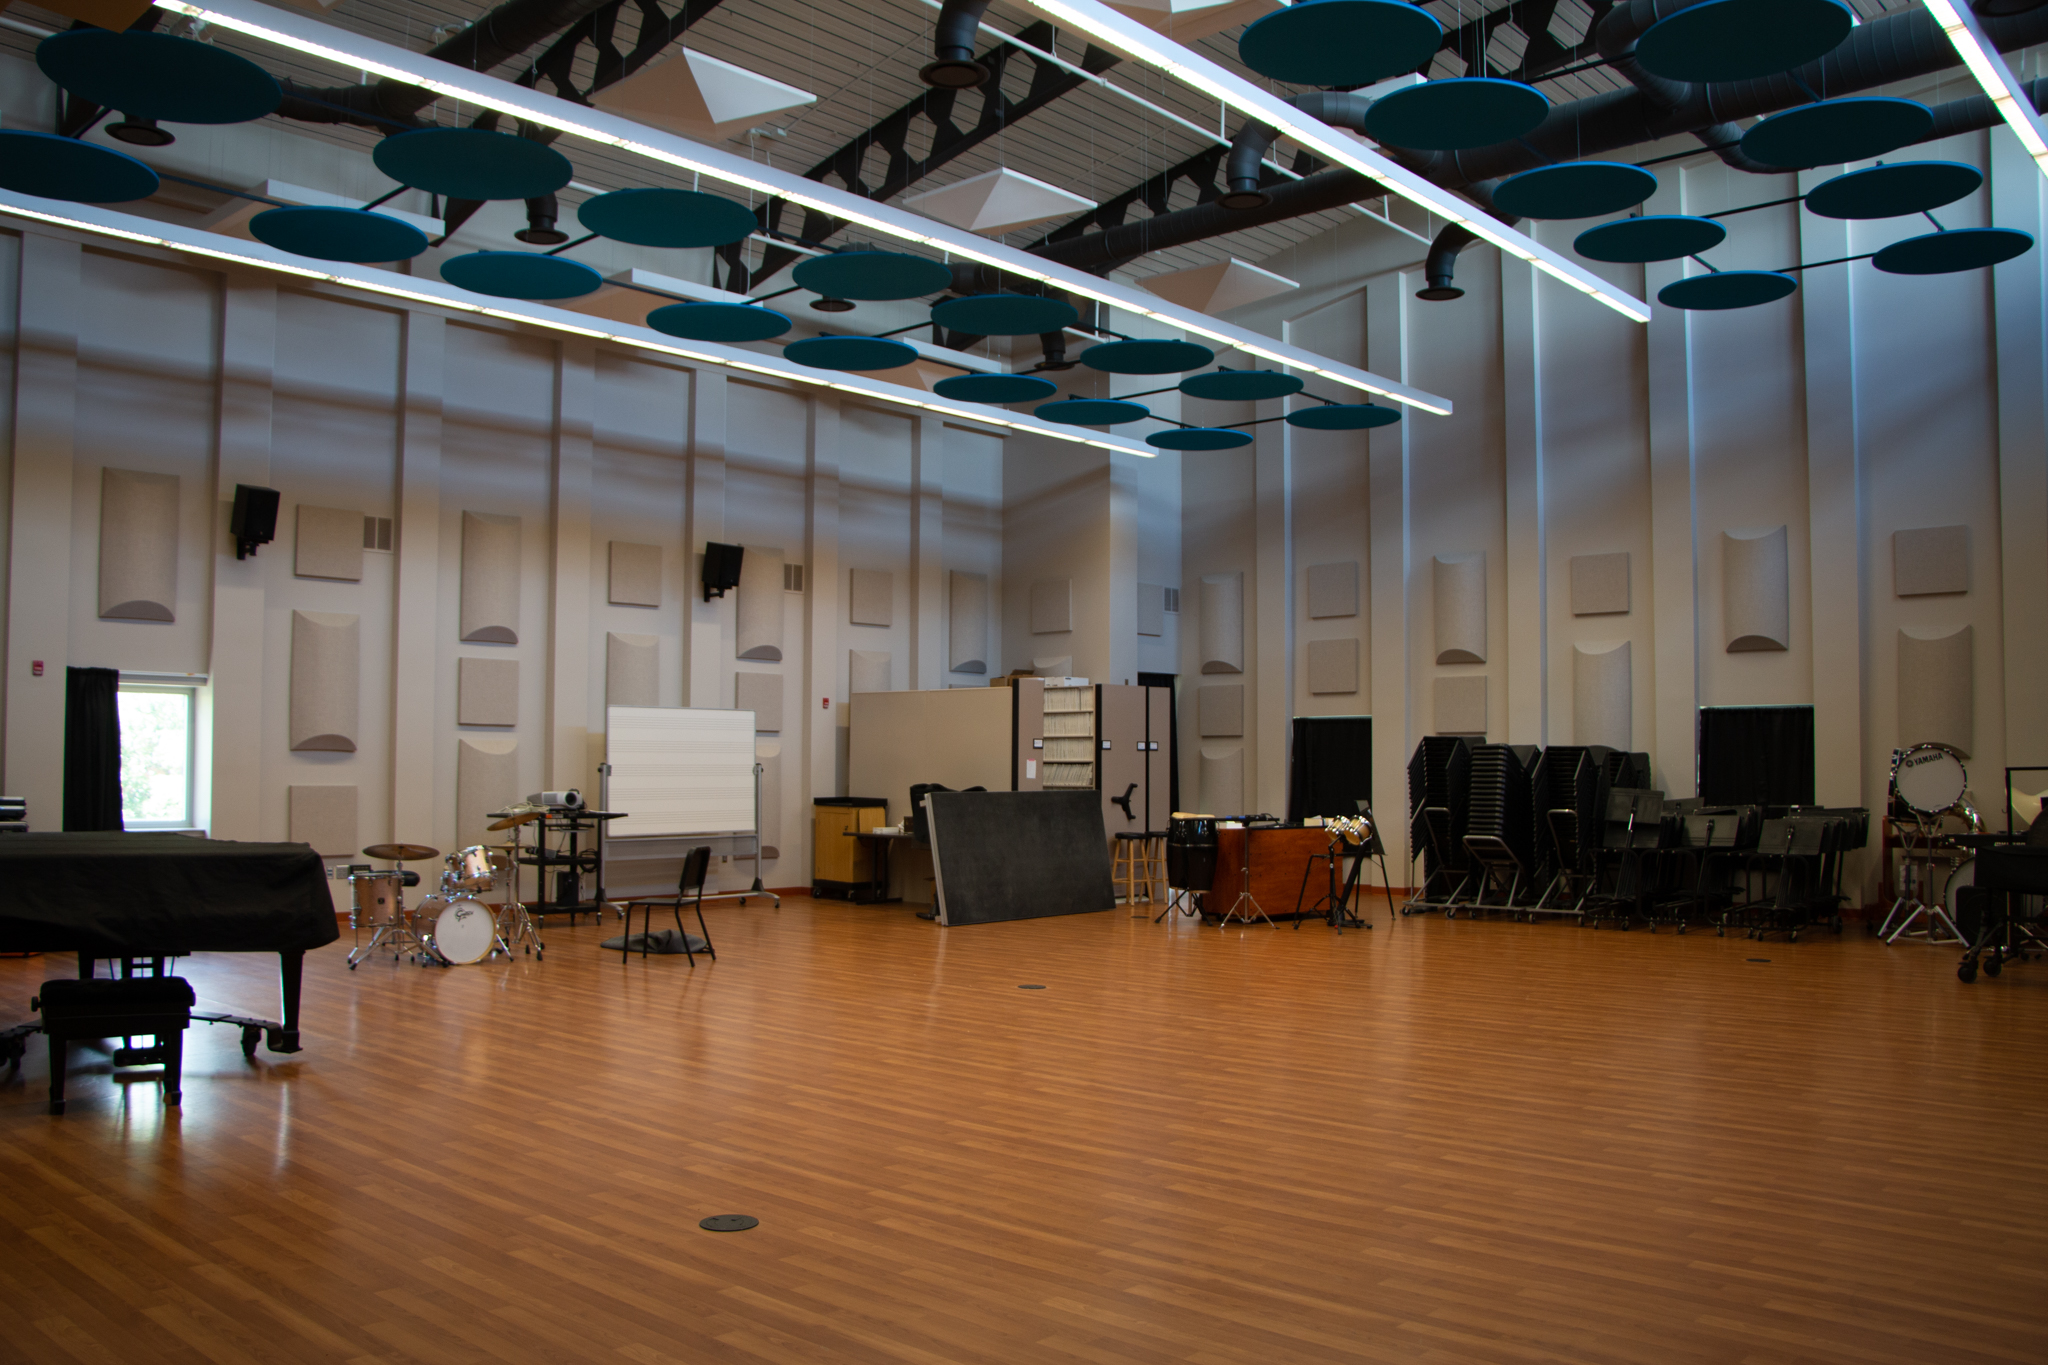 Jindra Band Room with chairs, music stands, and baby grand piano